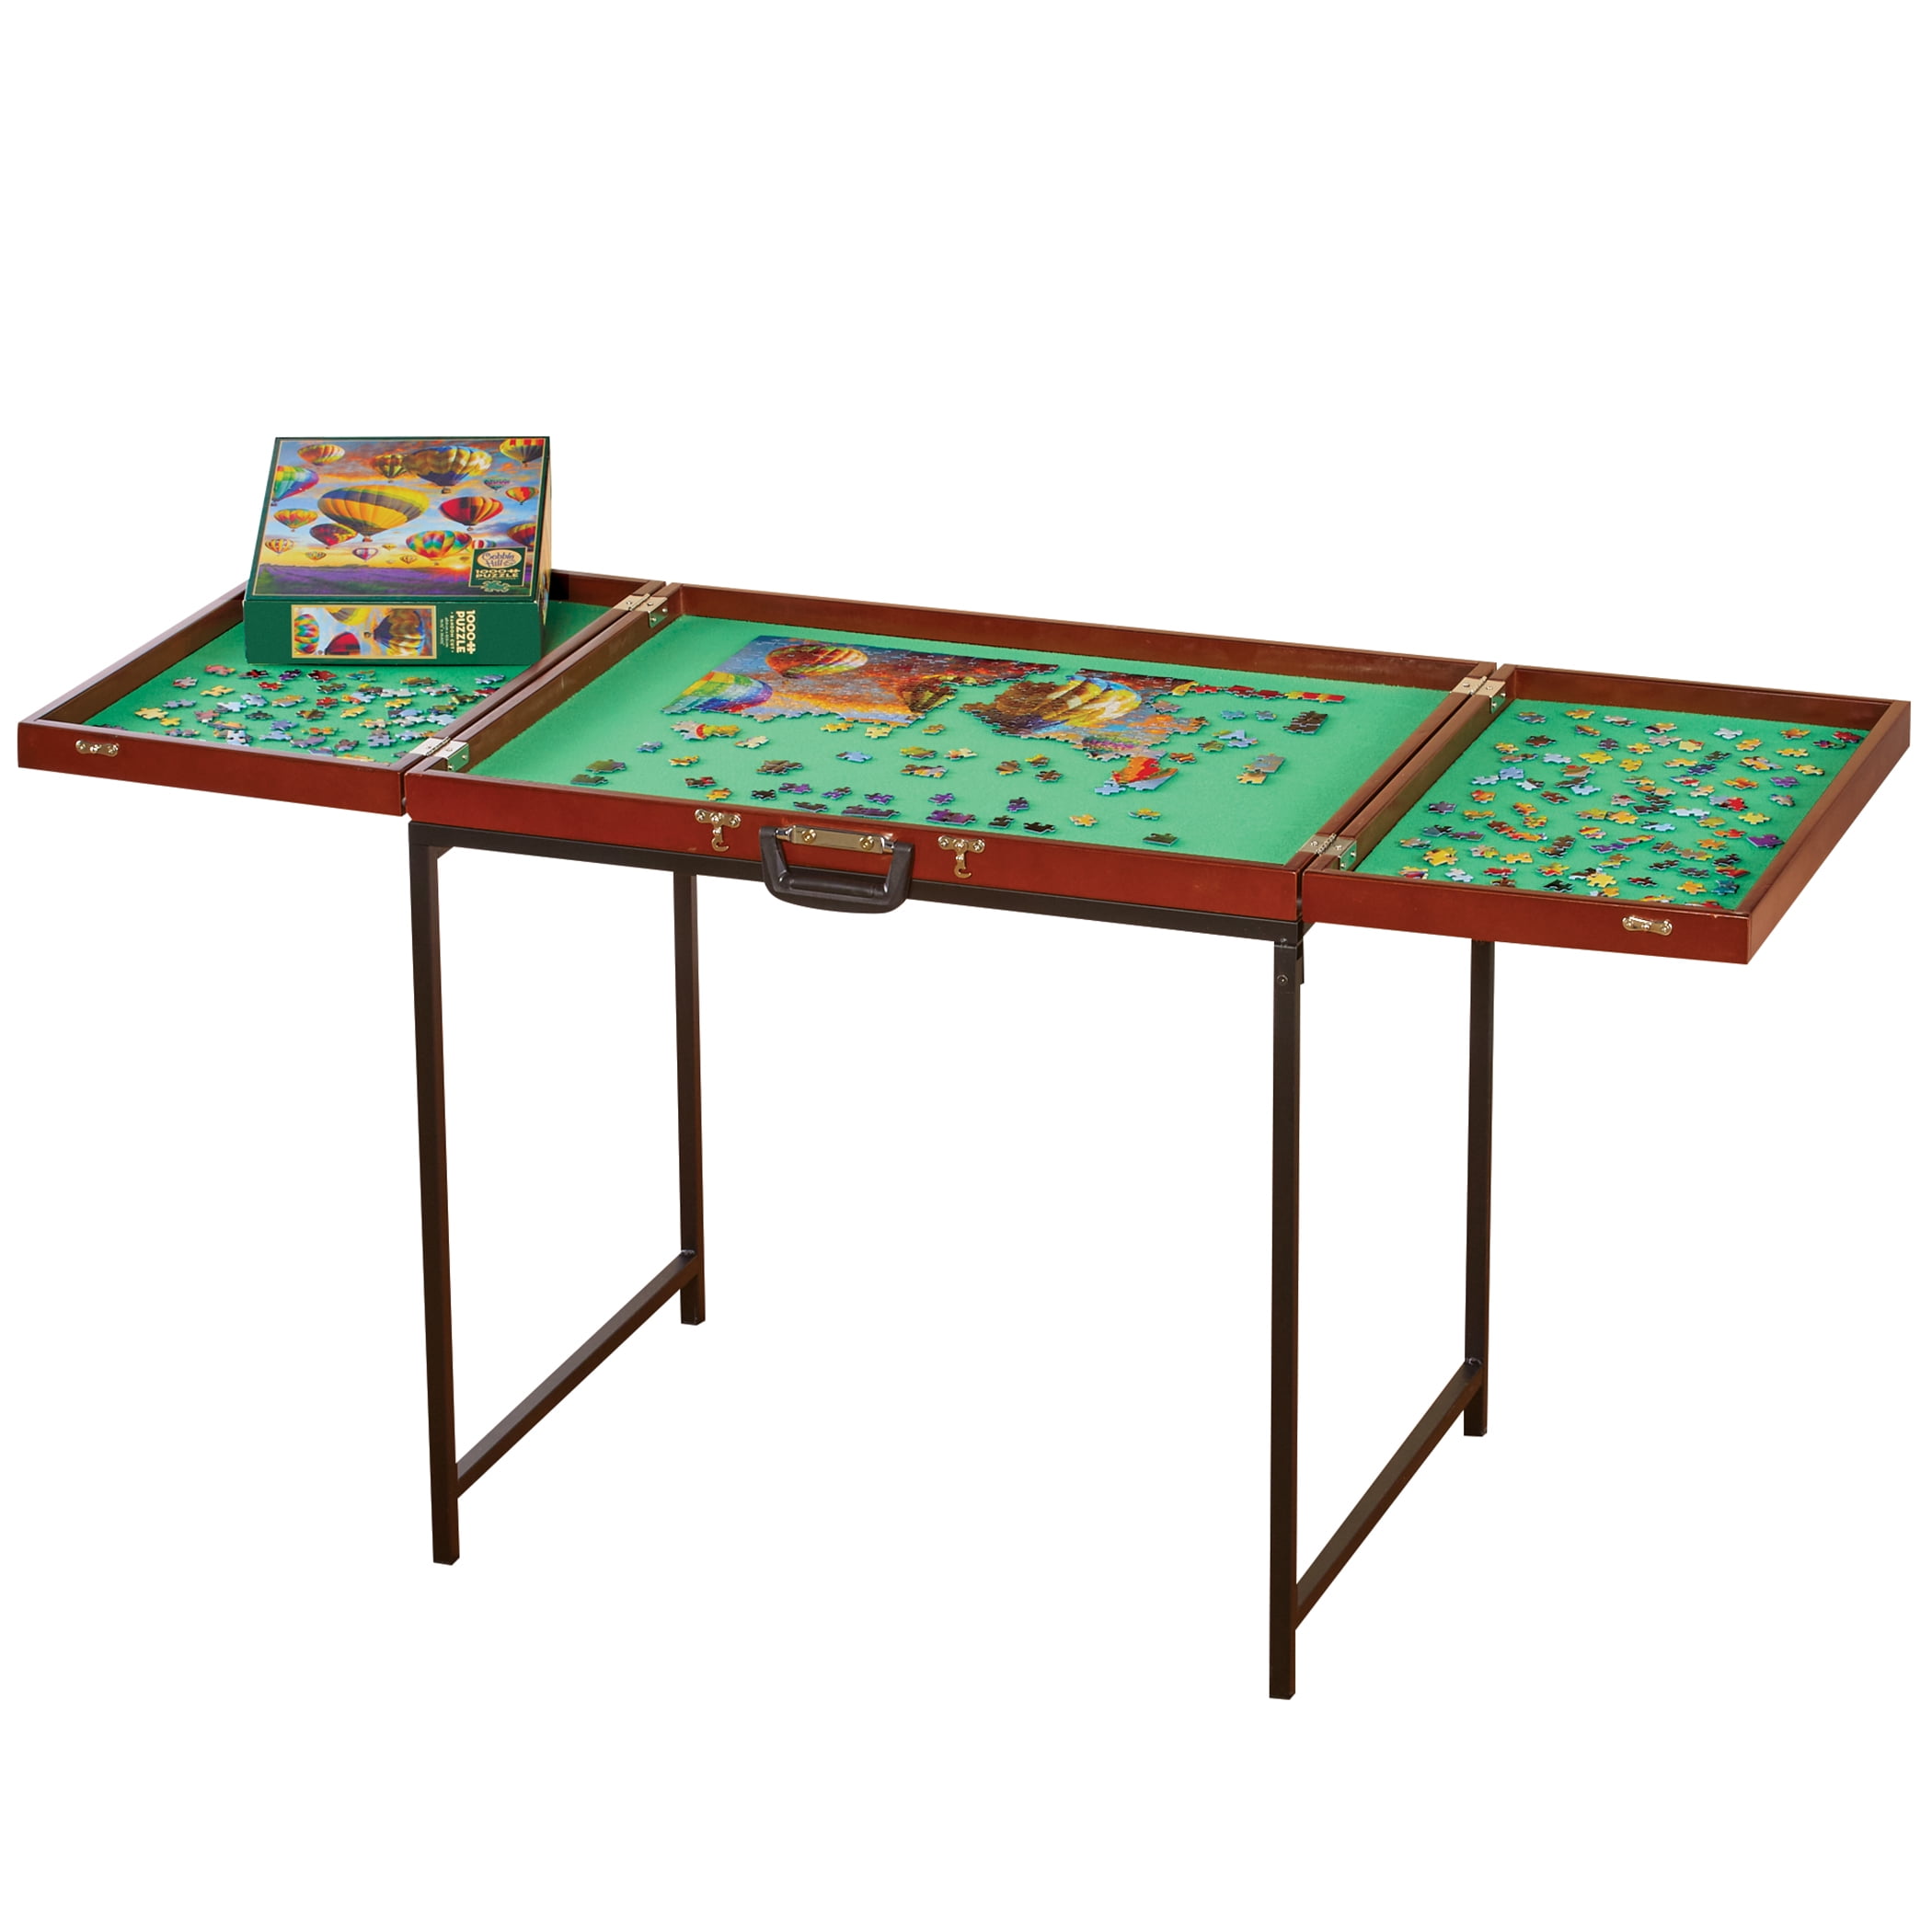 Family Game Night Jigsaw Puzzle for Kids Jigsaw Puzzle Table Family Board Game Childrens Jigsaw Puzzle Cardboard Puzzle for Adults